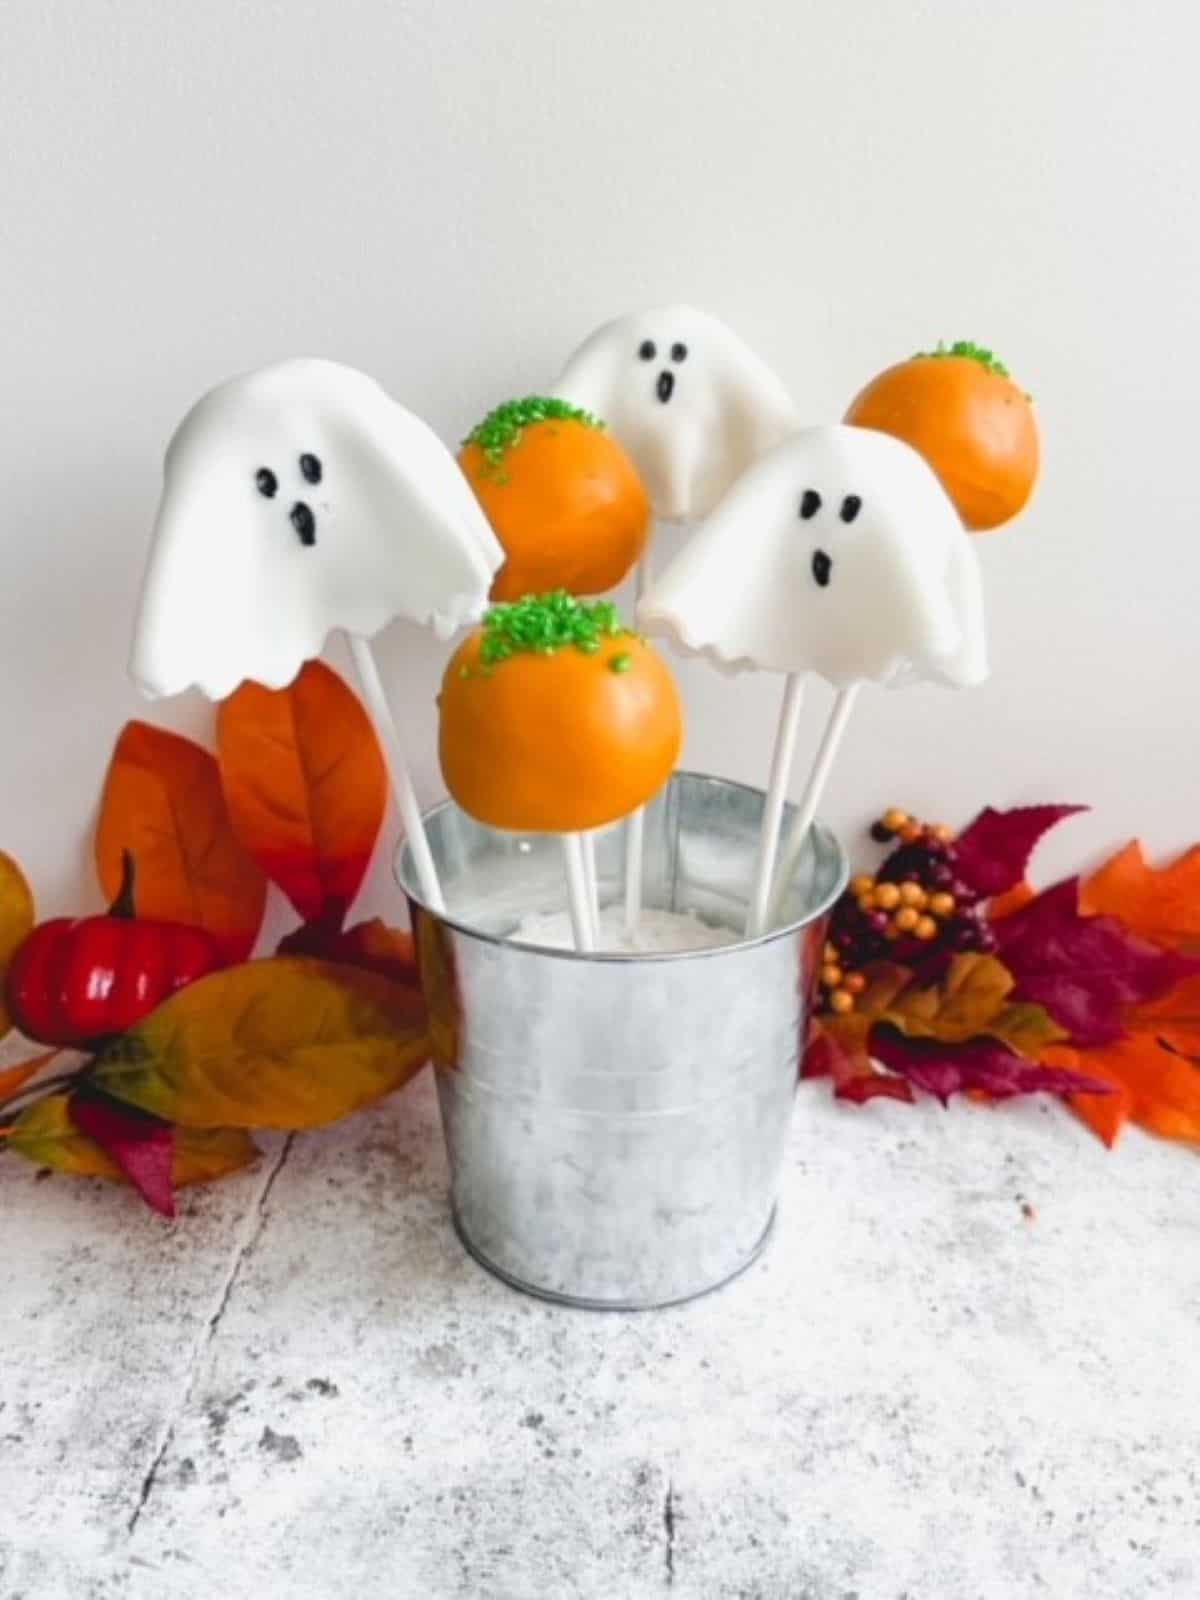 Halloween Cake Pops decorated like pumpkins and ghosts in a silver pail with artificial leaves in the background